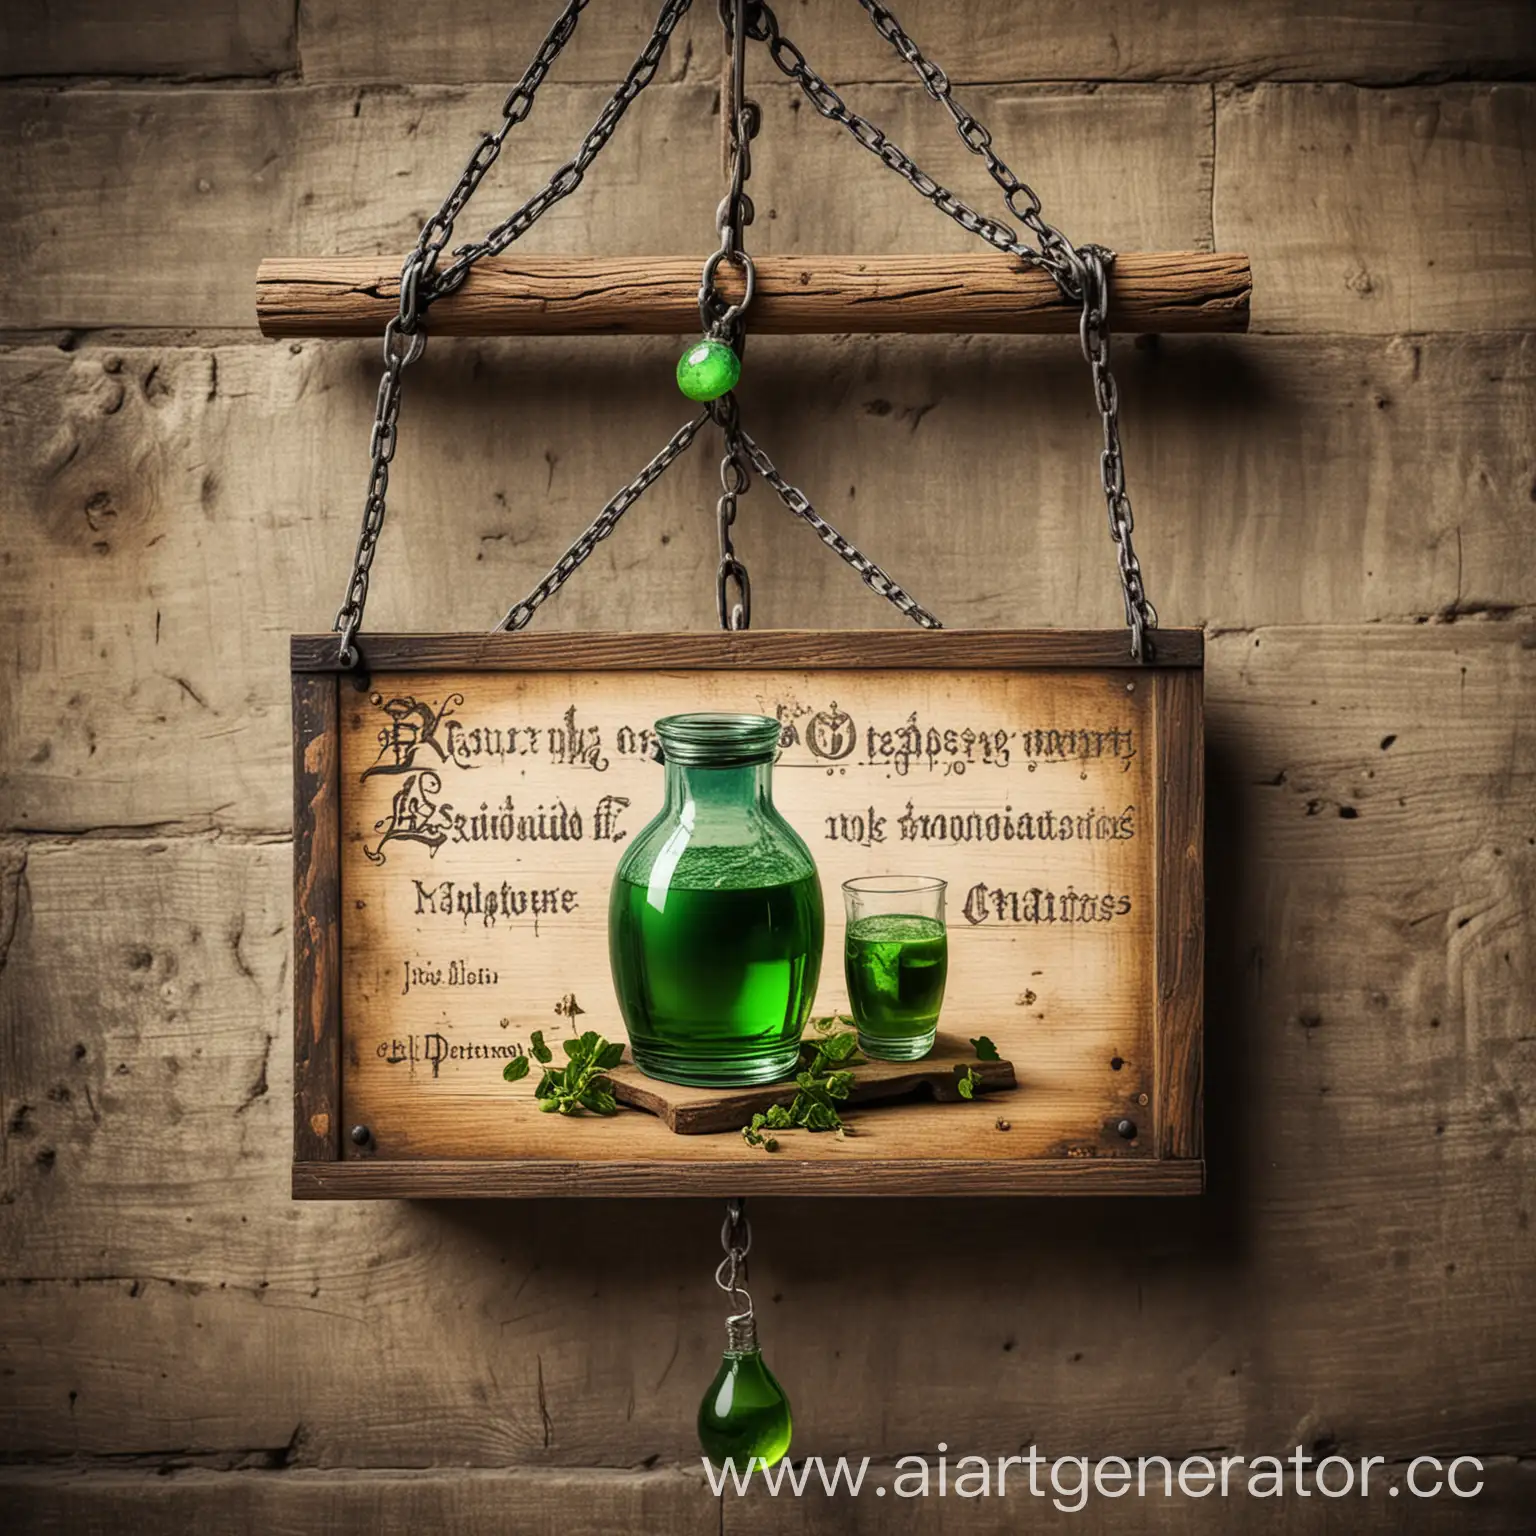 Medieval-Wooden-Sign-with-Hanging-Chains-and-Green-Potion-Image